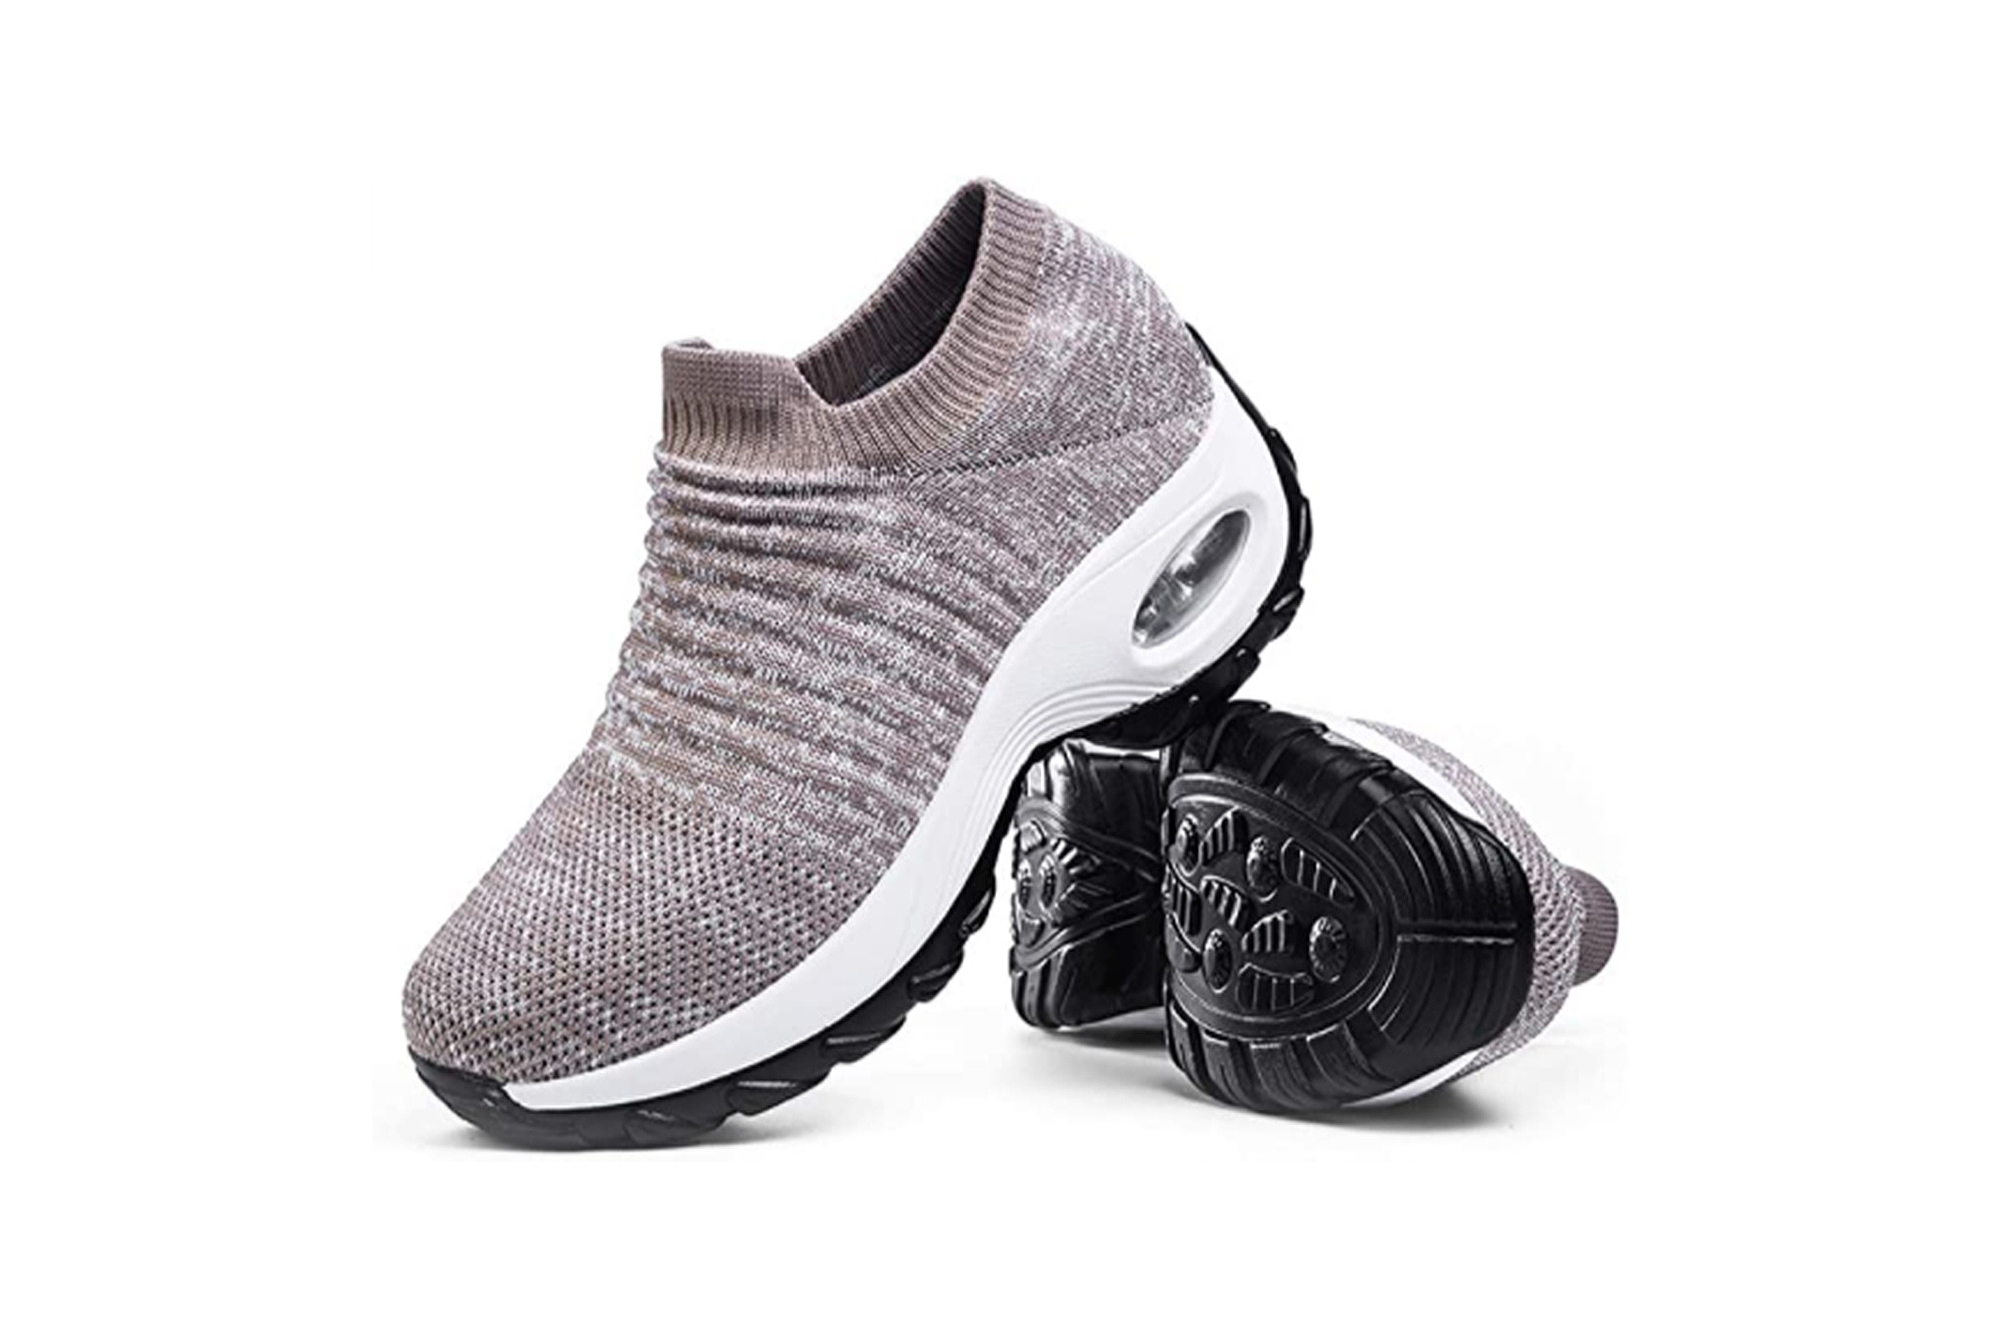 Slow Man Mesh Slip-On Sneakers Are Just 